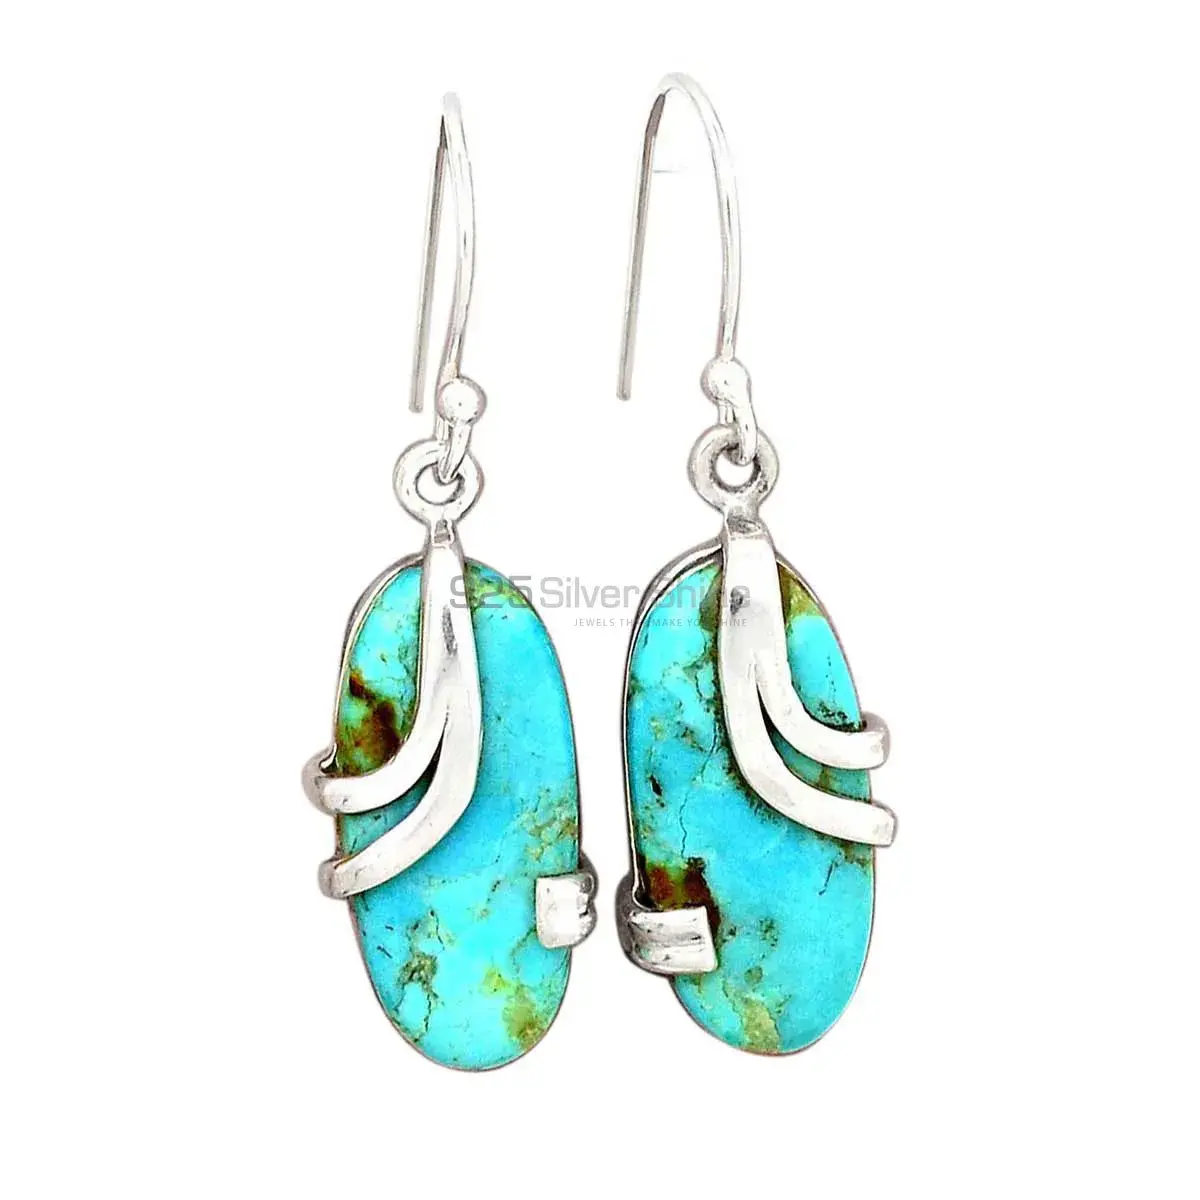 Wholesale 925 Sterling Silver Earrings In Natural Turquoise Gemstone 925SE2111